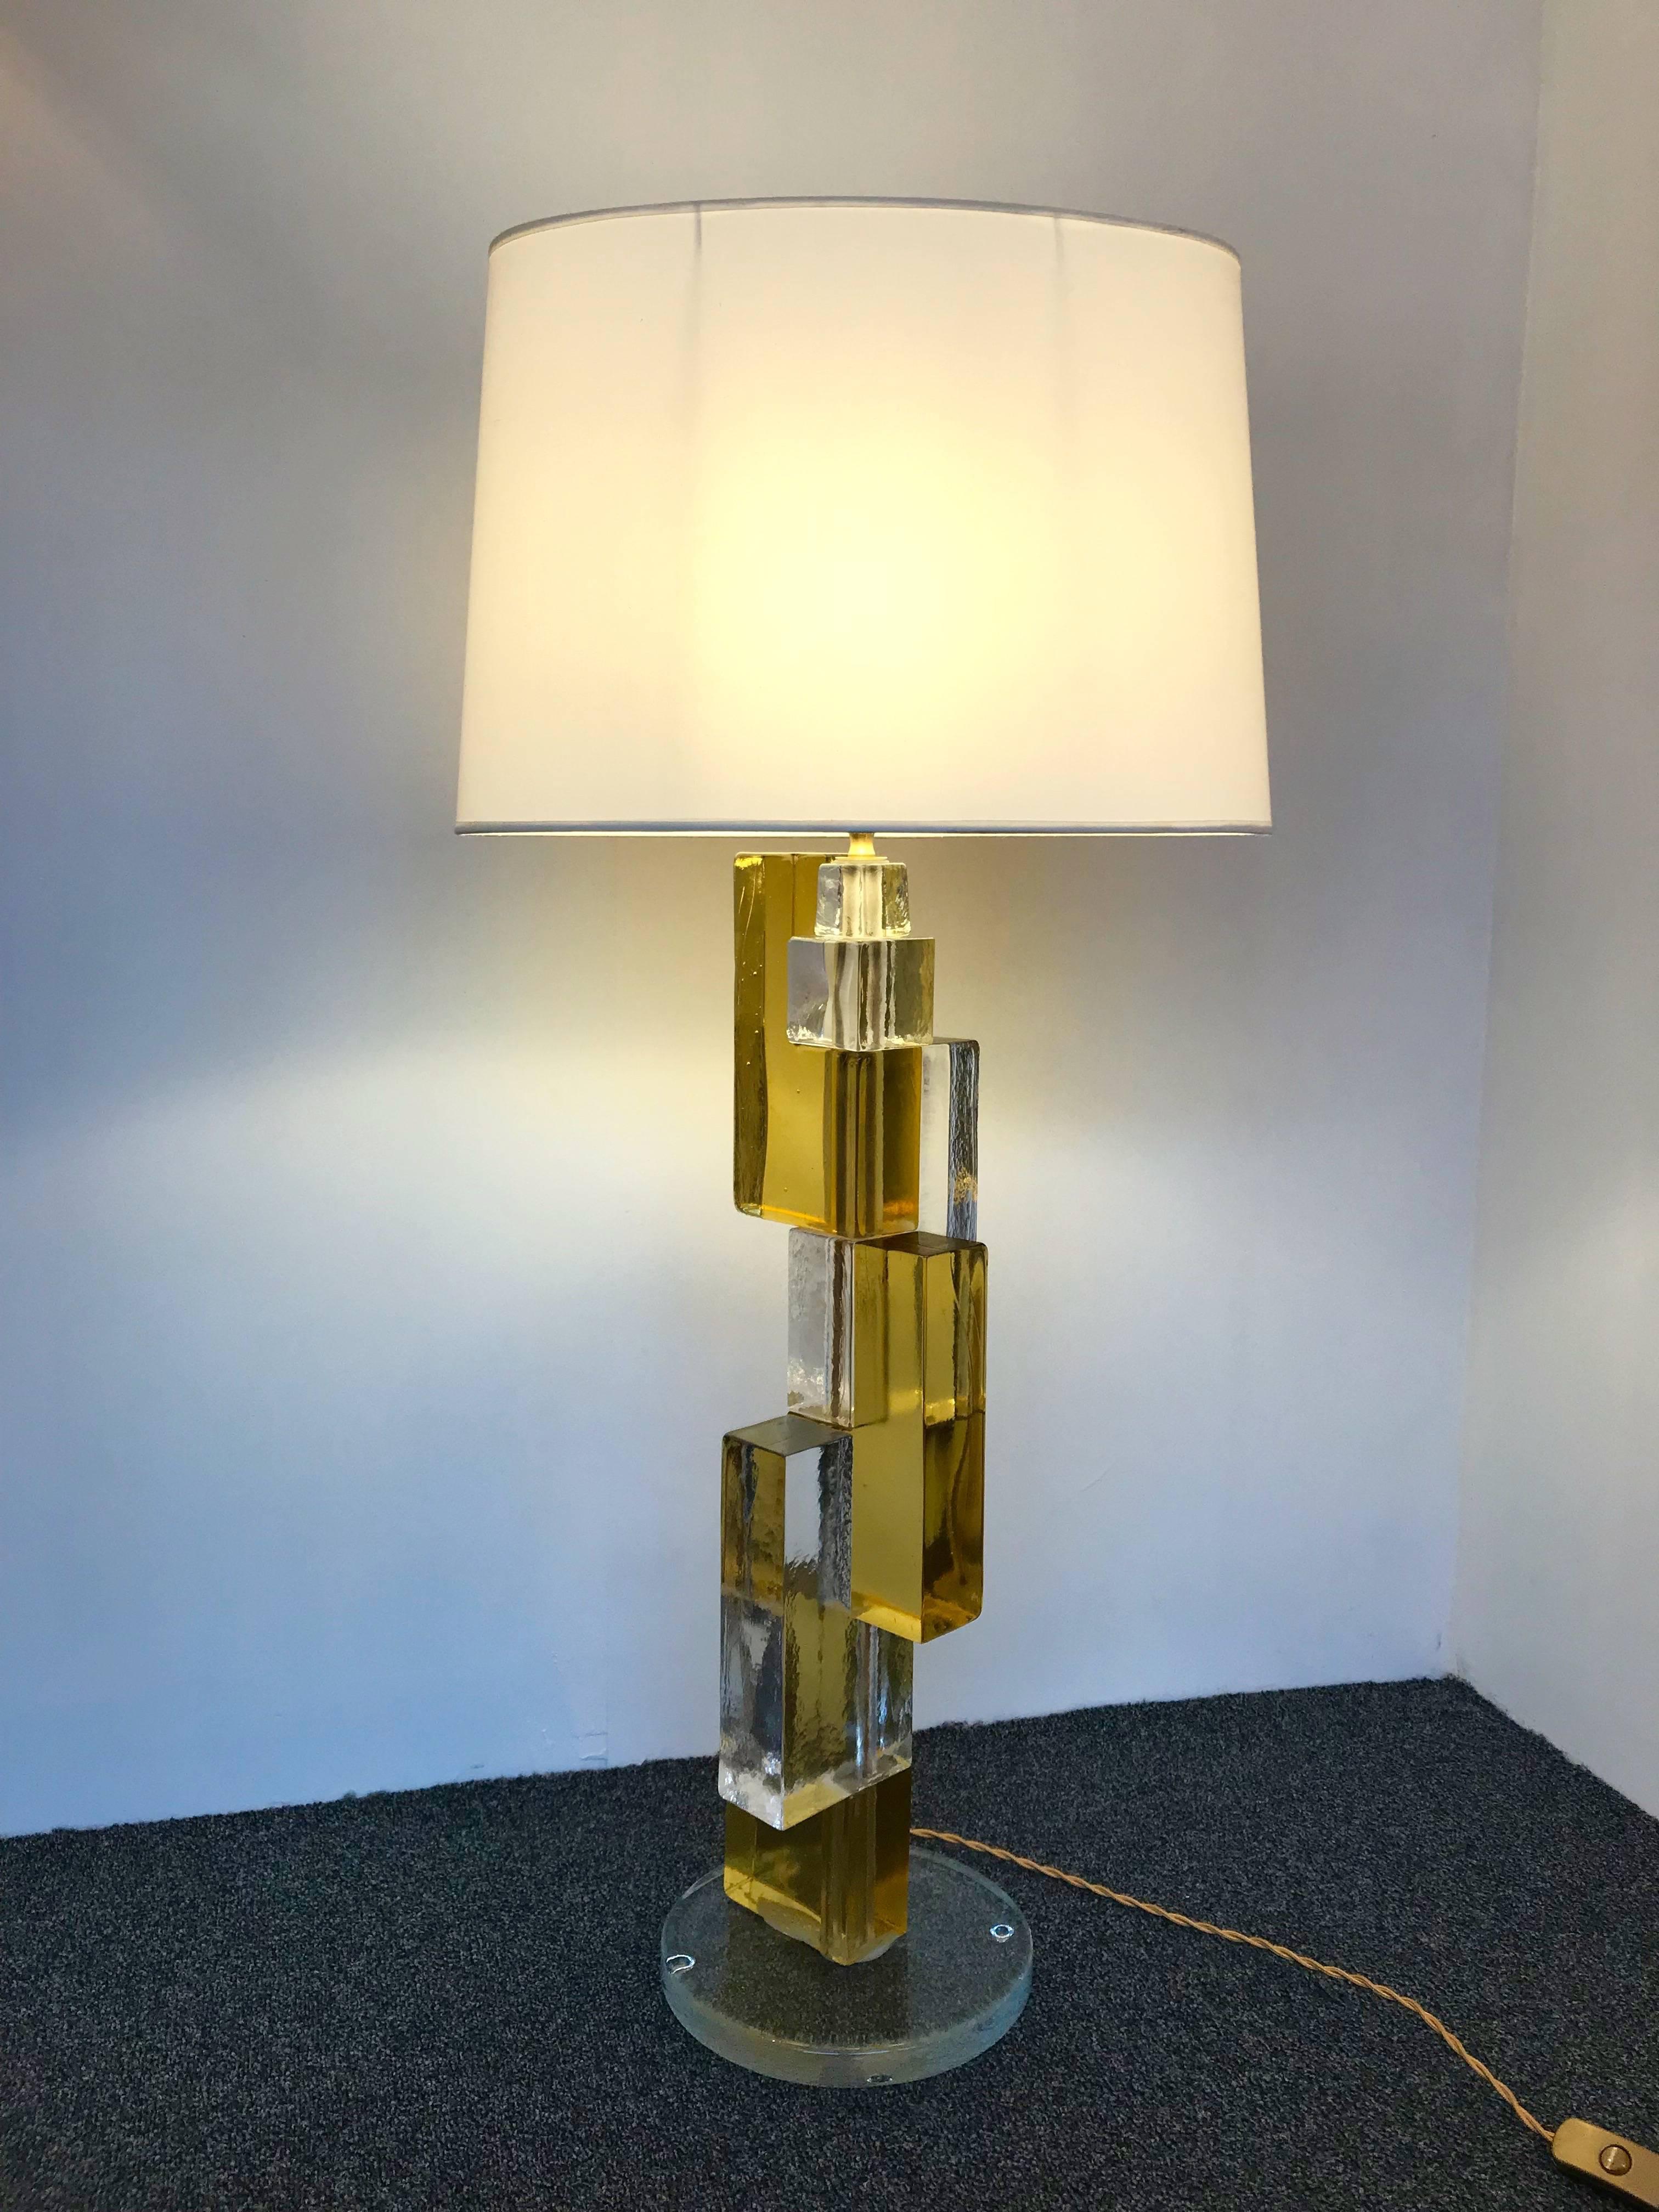 Huge pair of contemporary table lamps cubic pressed Murano glass block. Few exclusive production from a small Italian design workshop. In the style of Mazzega, Poliarte, Venini, Vistosi.

Measure: Height top of lamp 73 centimeters. Demonstration